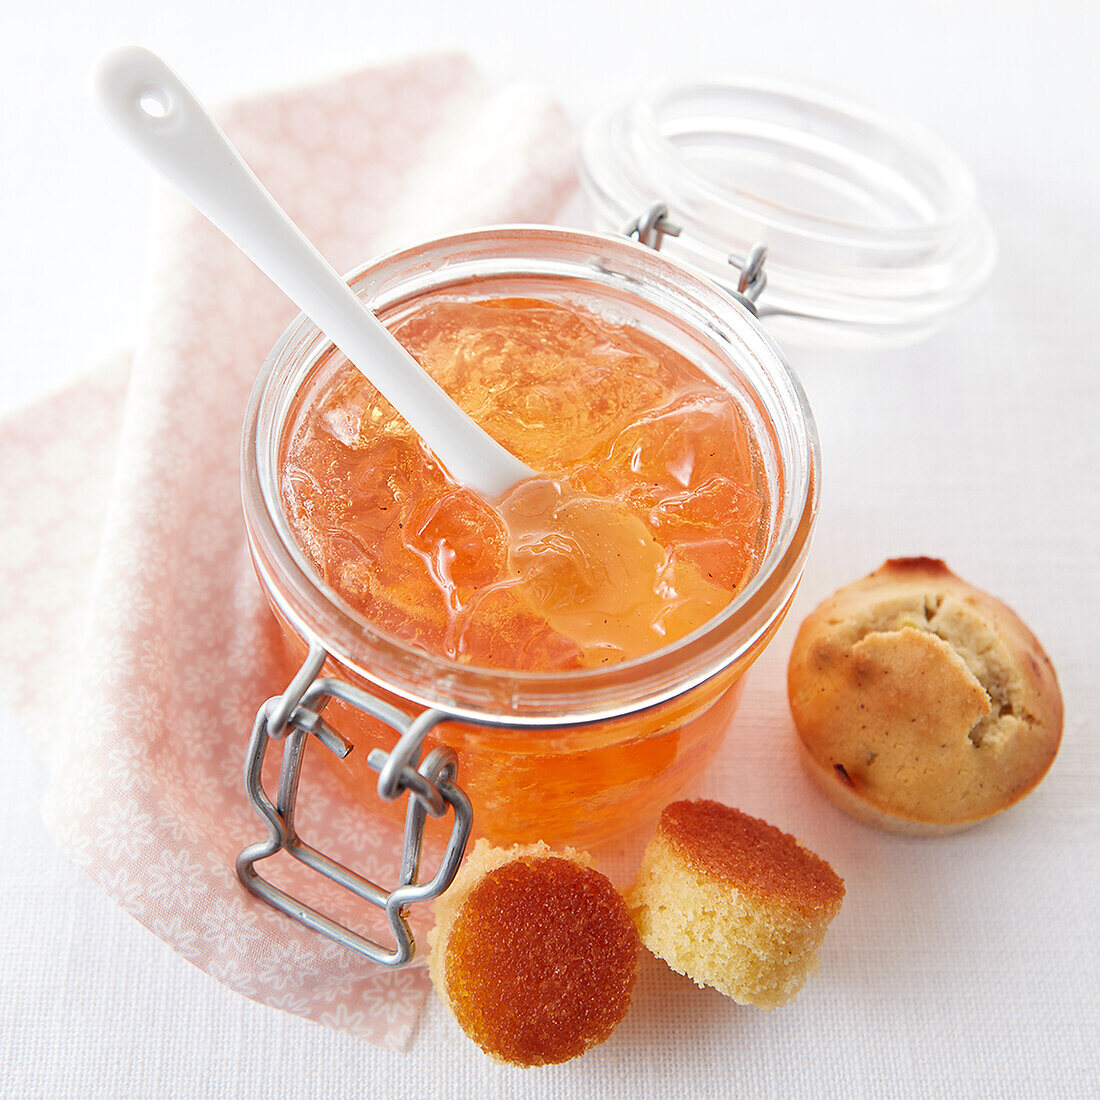 Quince jam